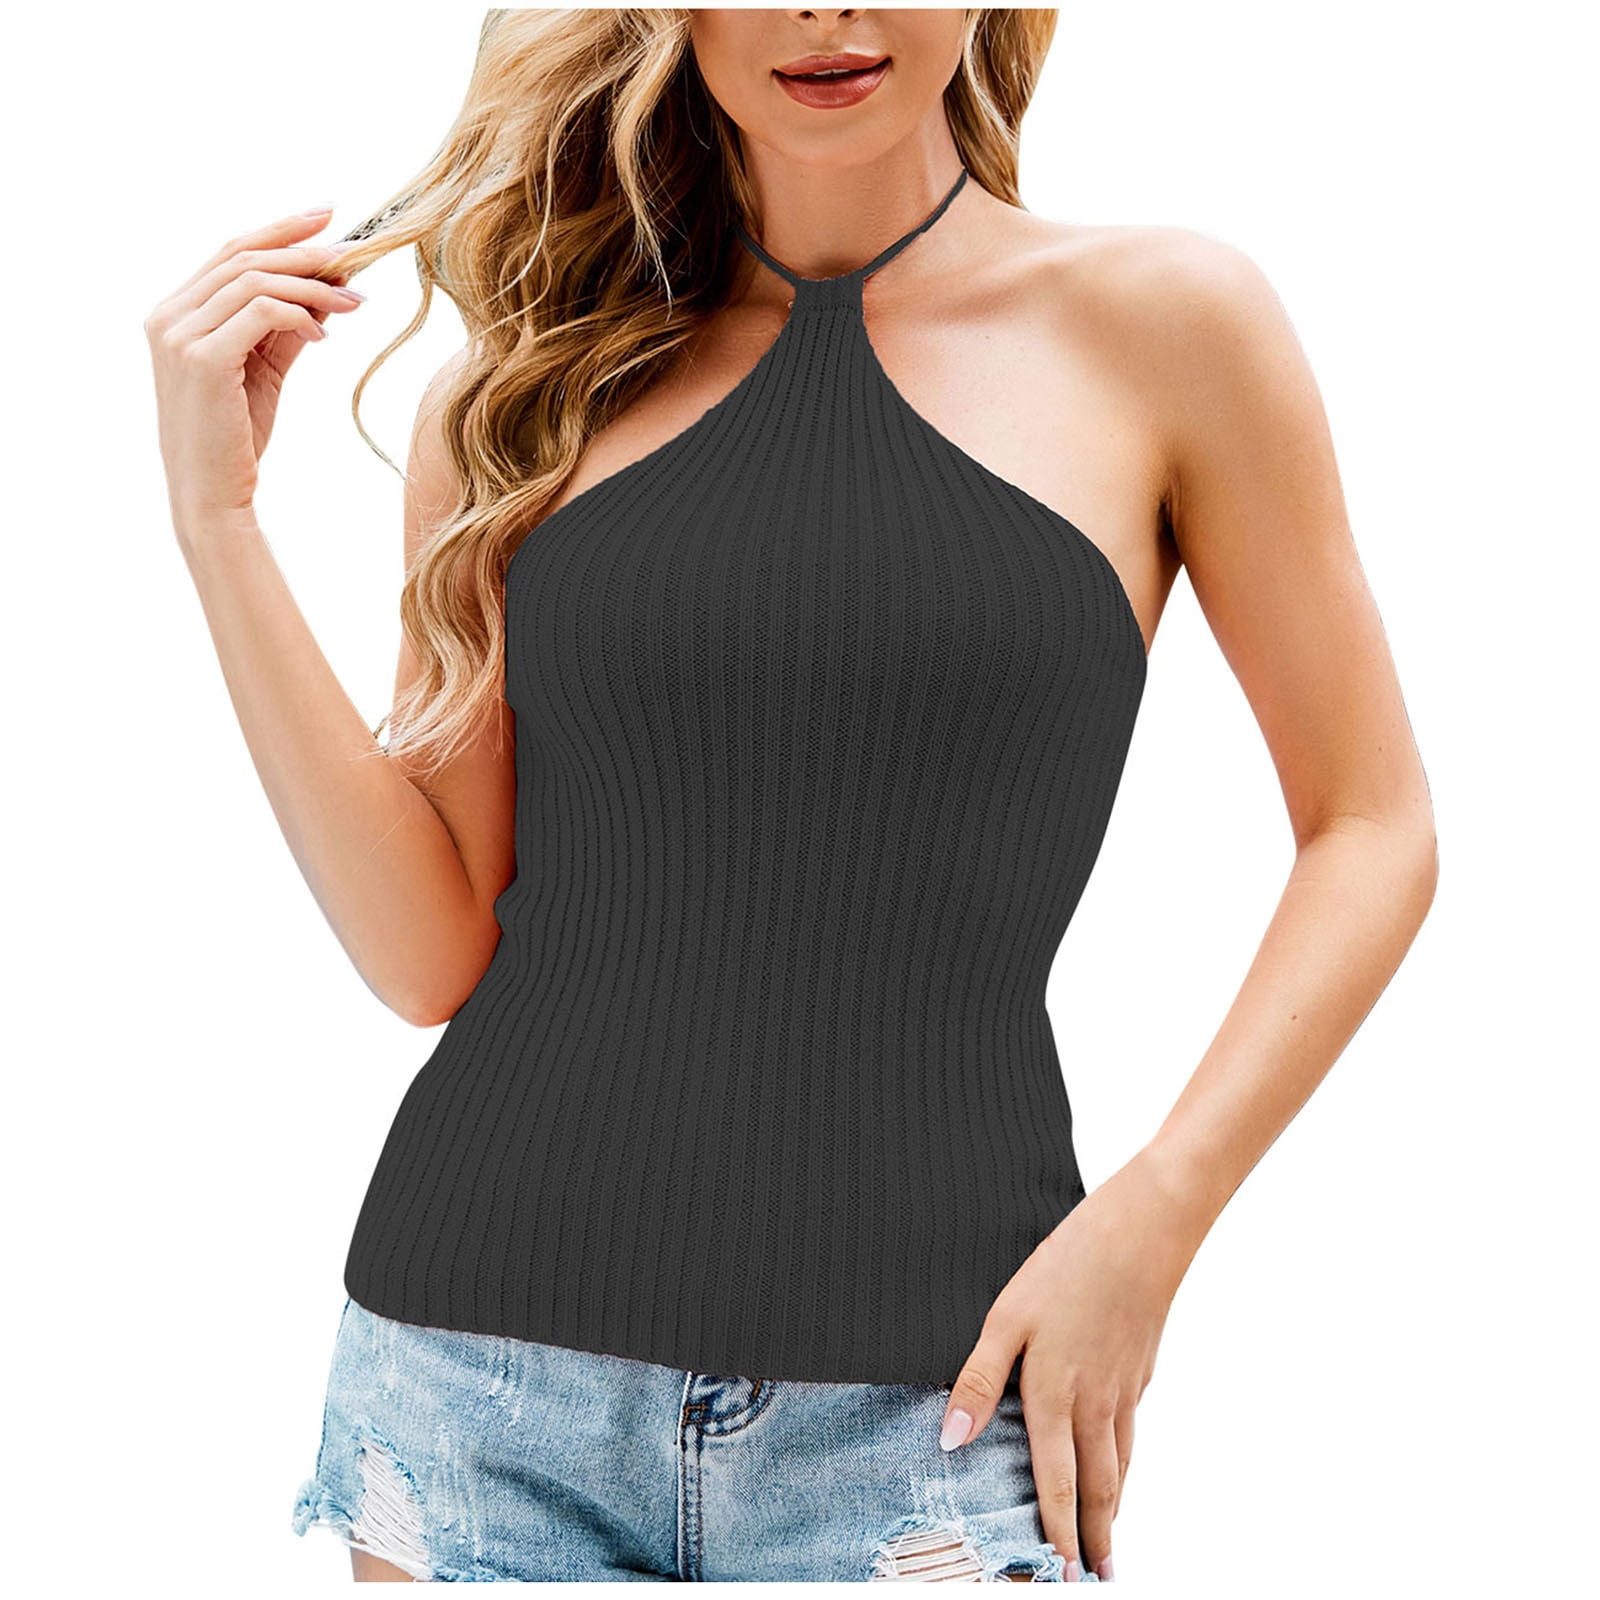 Olyvenn Summer Cozy Clothing Halter Shirts Workout Racerback Tank Tops for  Women Knitting Tee Tops Solid Tee Sexy Slim Camis Womens Sleeveless Tees